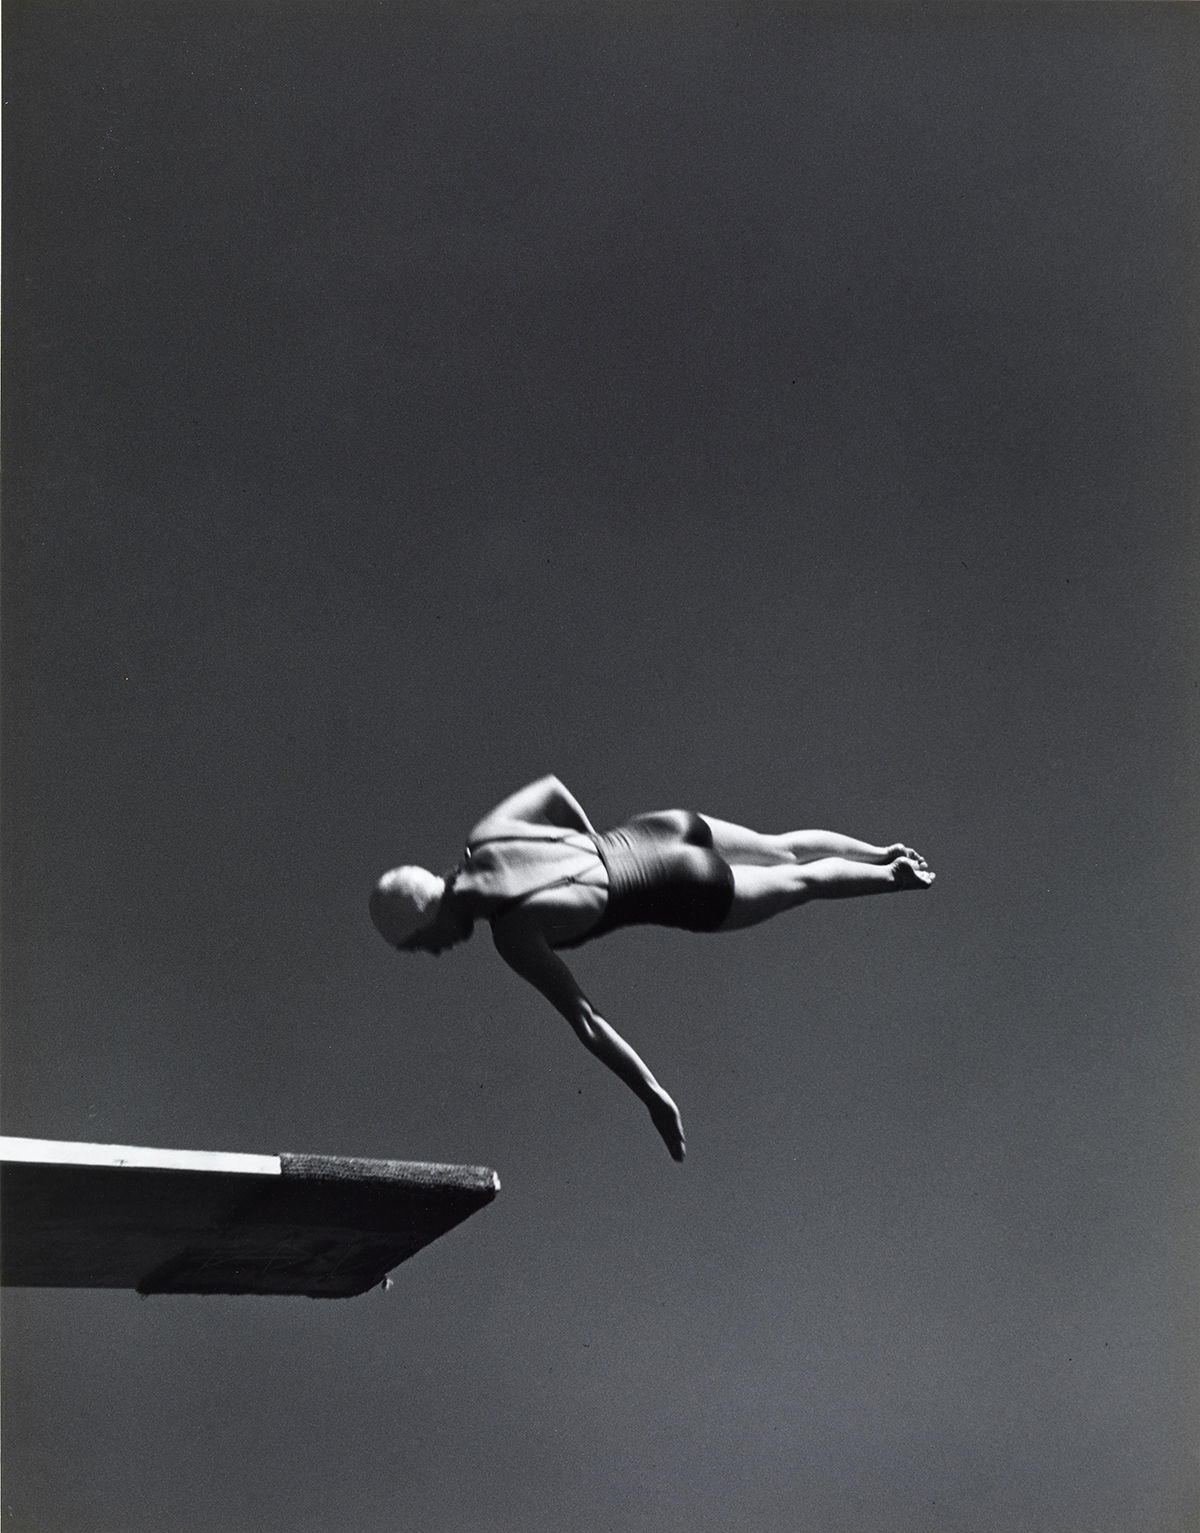 VIII/X Class. Olympic High Diving Champion Marjorie Gestring © 1999 Arizona Board of Regents, Centre for Creative Photography. © COLECCIONES Fundación MAPFRE